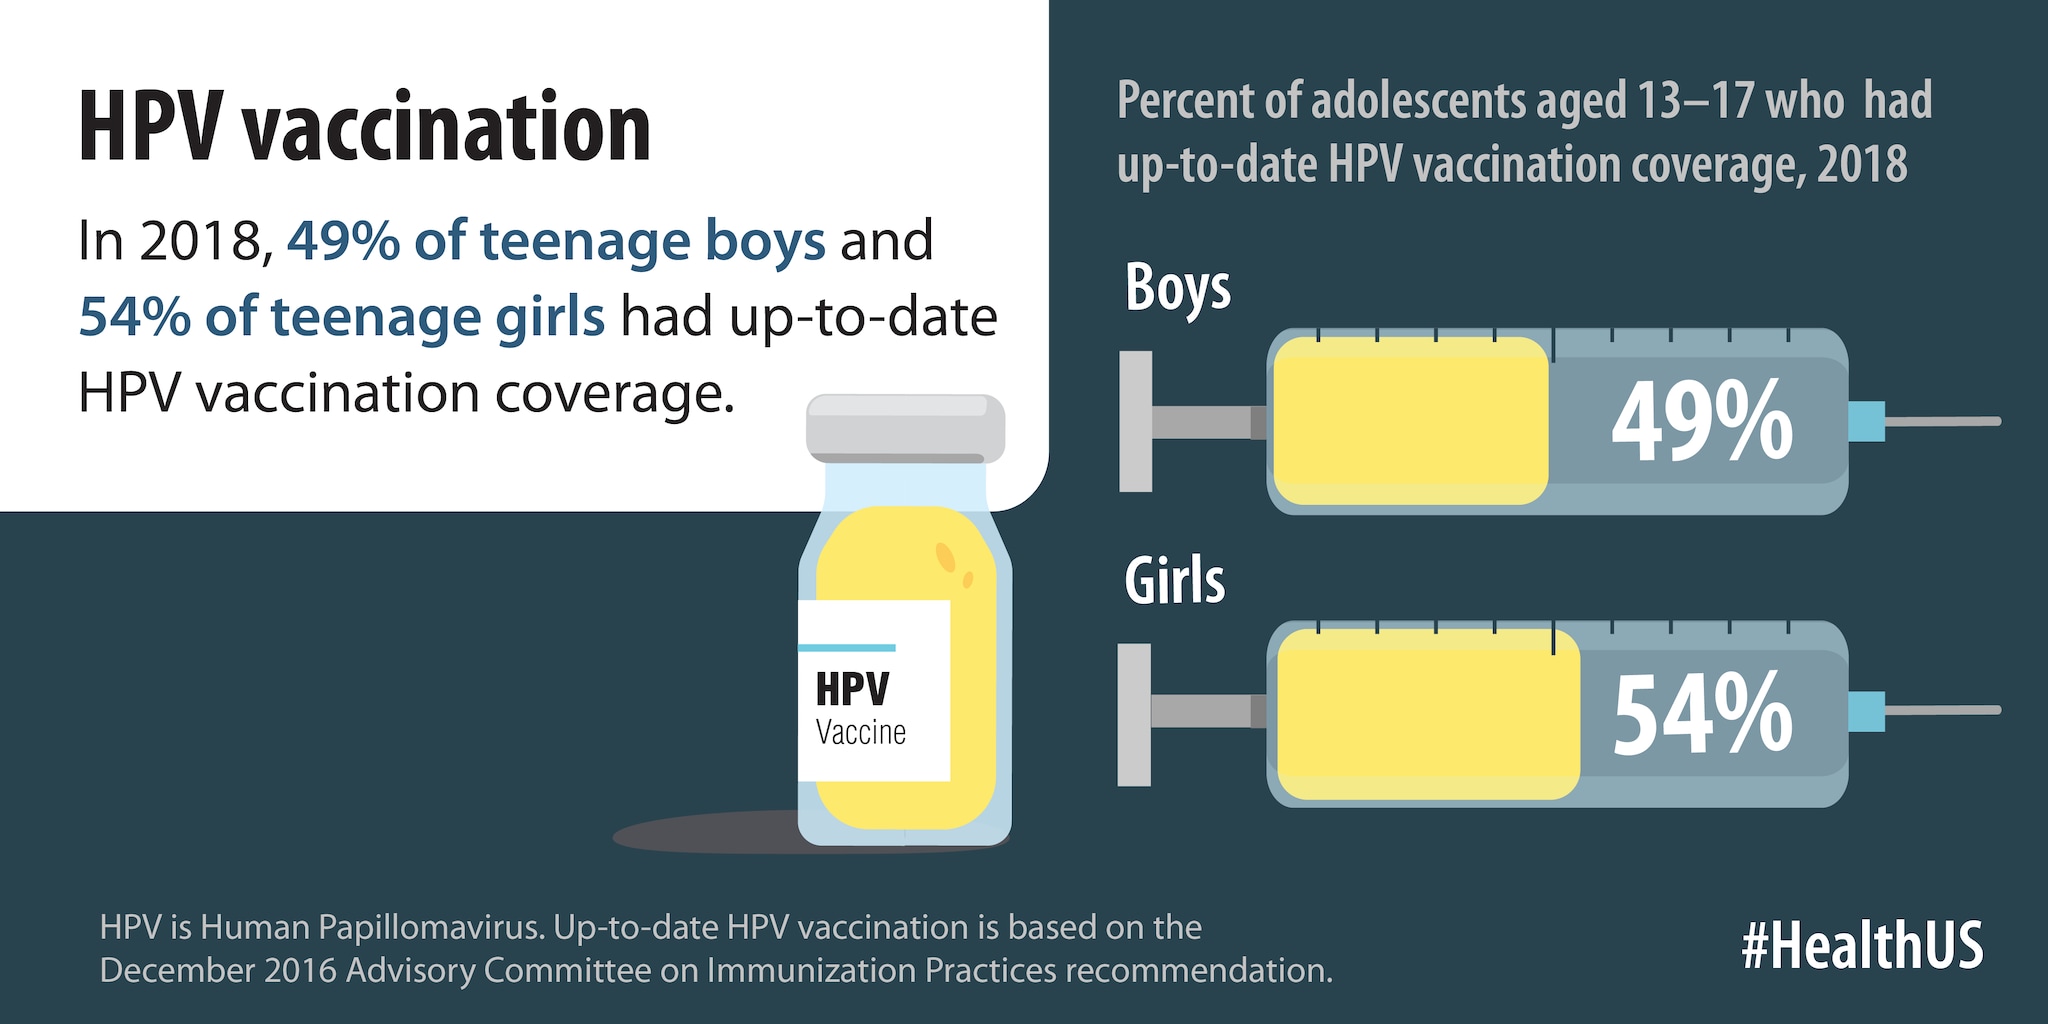 In 2018, 49% of teenage boys and 54% of teenage girls had up-to-date HPV vaccination coverage.